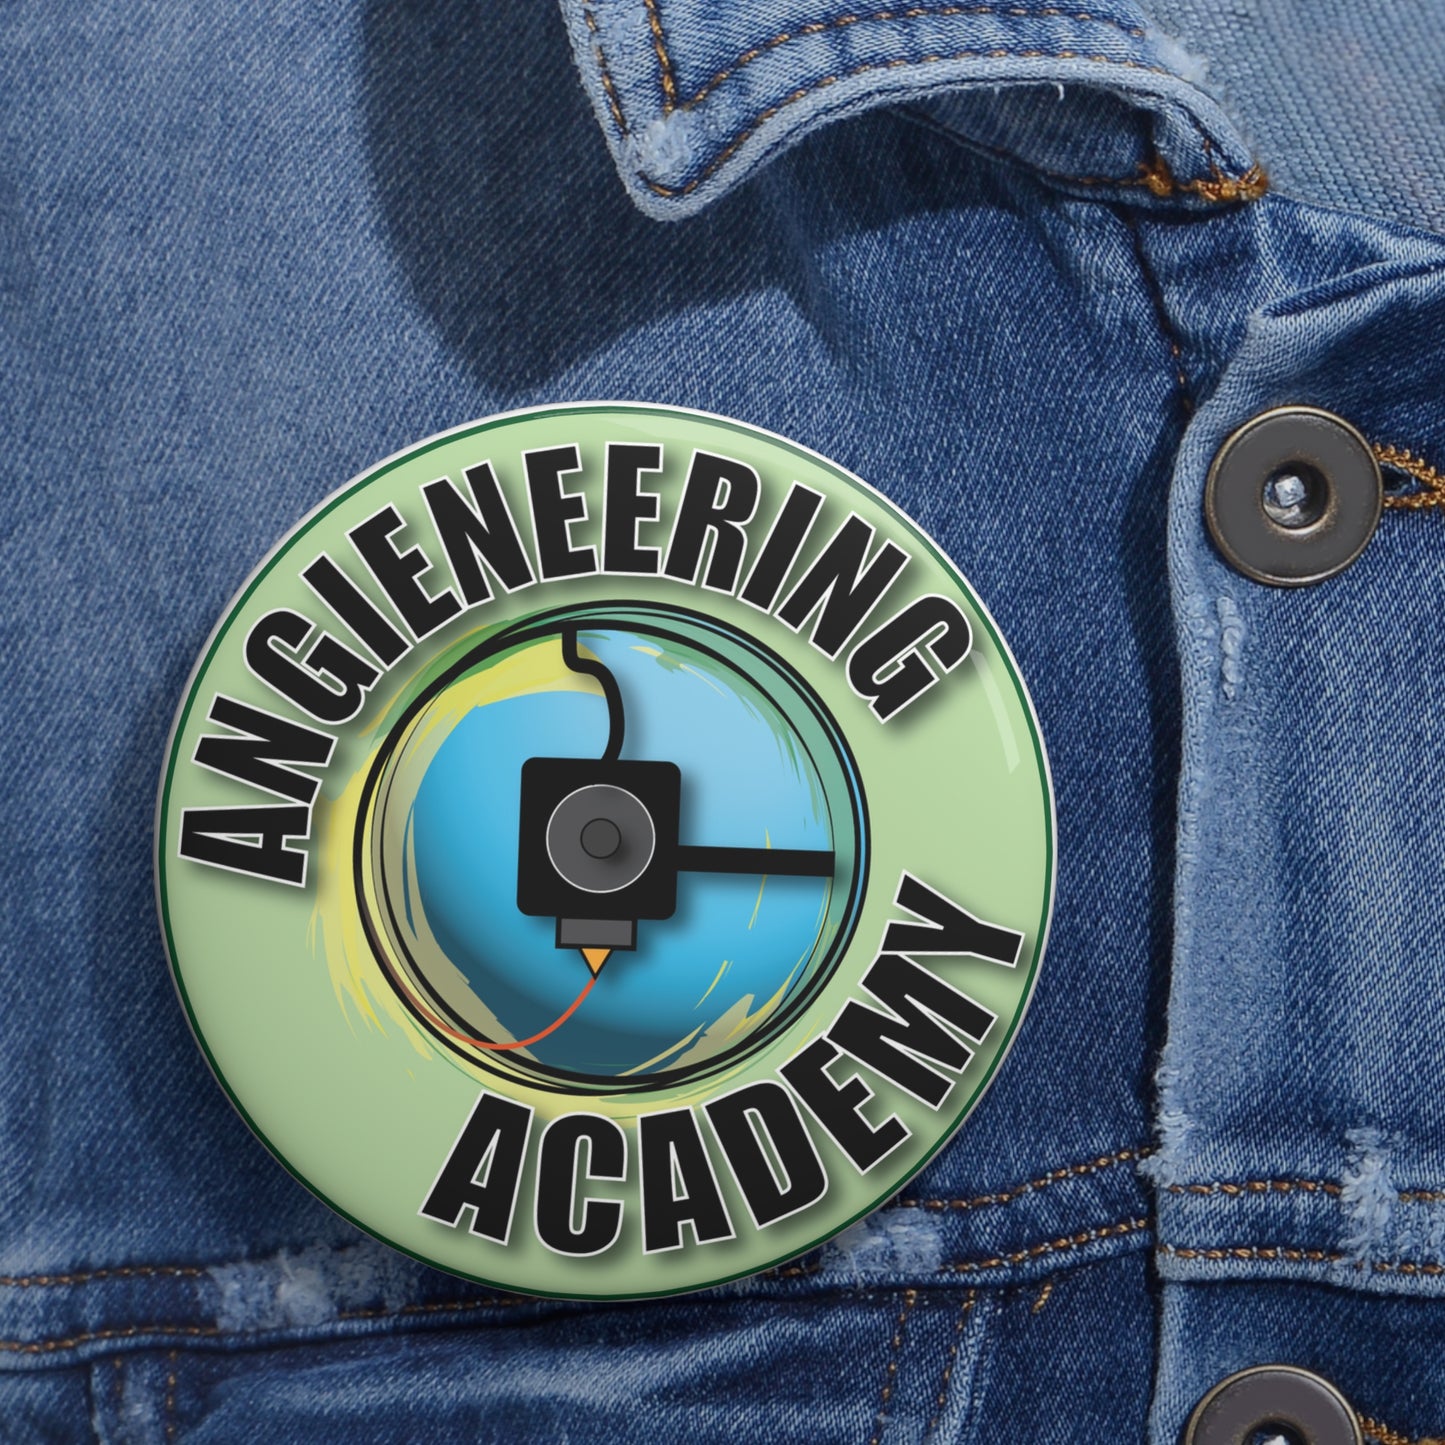 Angieneering Academy Pin Buttons